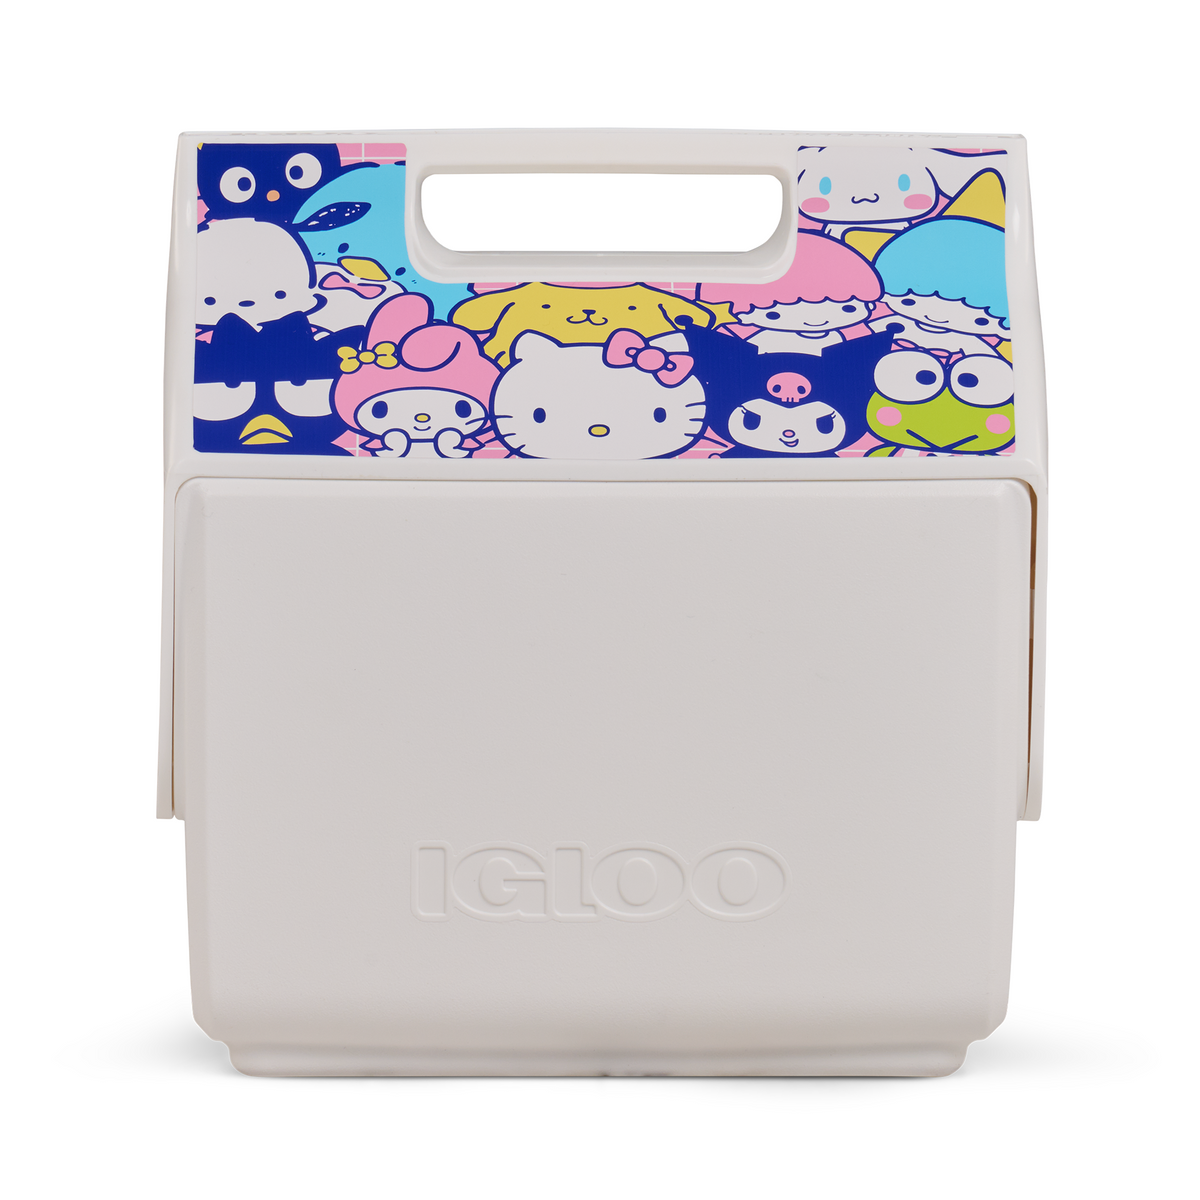 Hello Kitty and Friends x Igloo® Little Playmate 7 Qt Cooler Home Goods Igloo Products Corp   